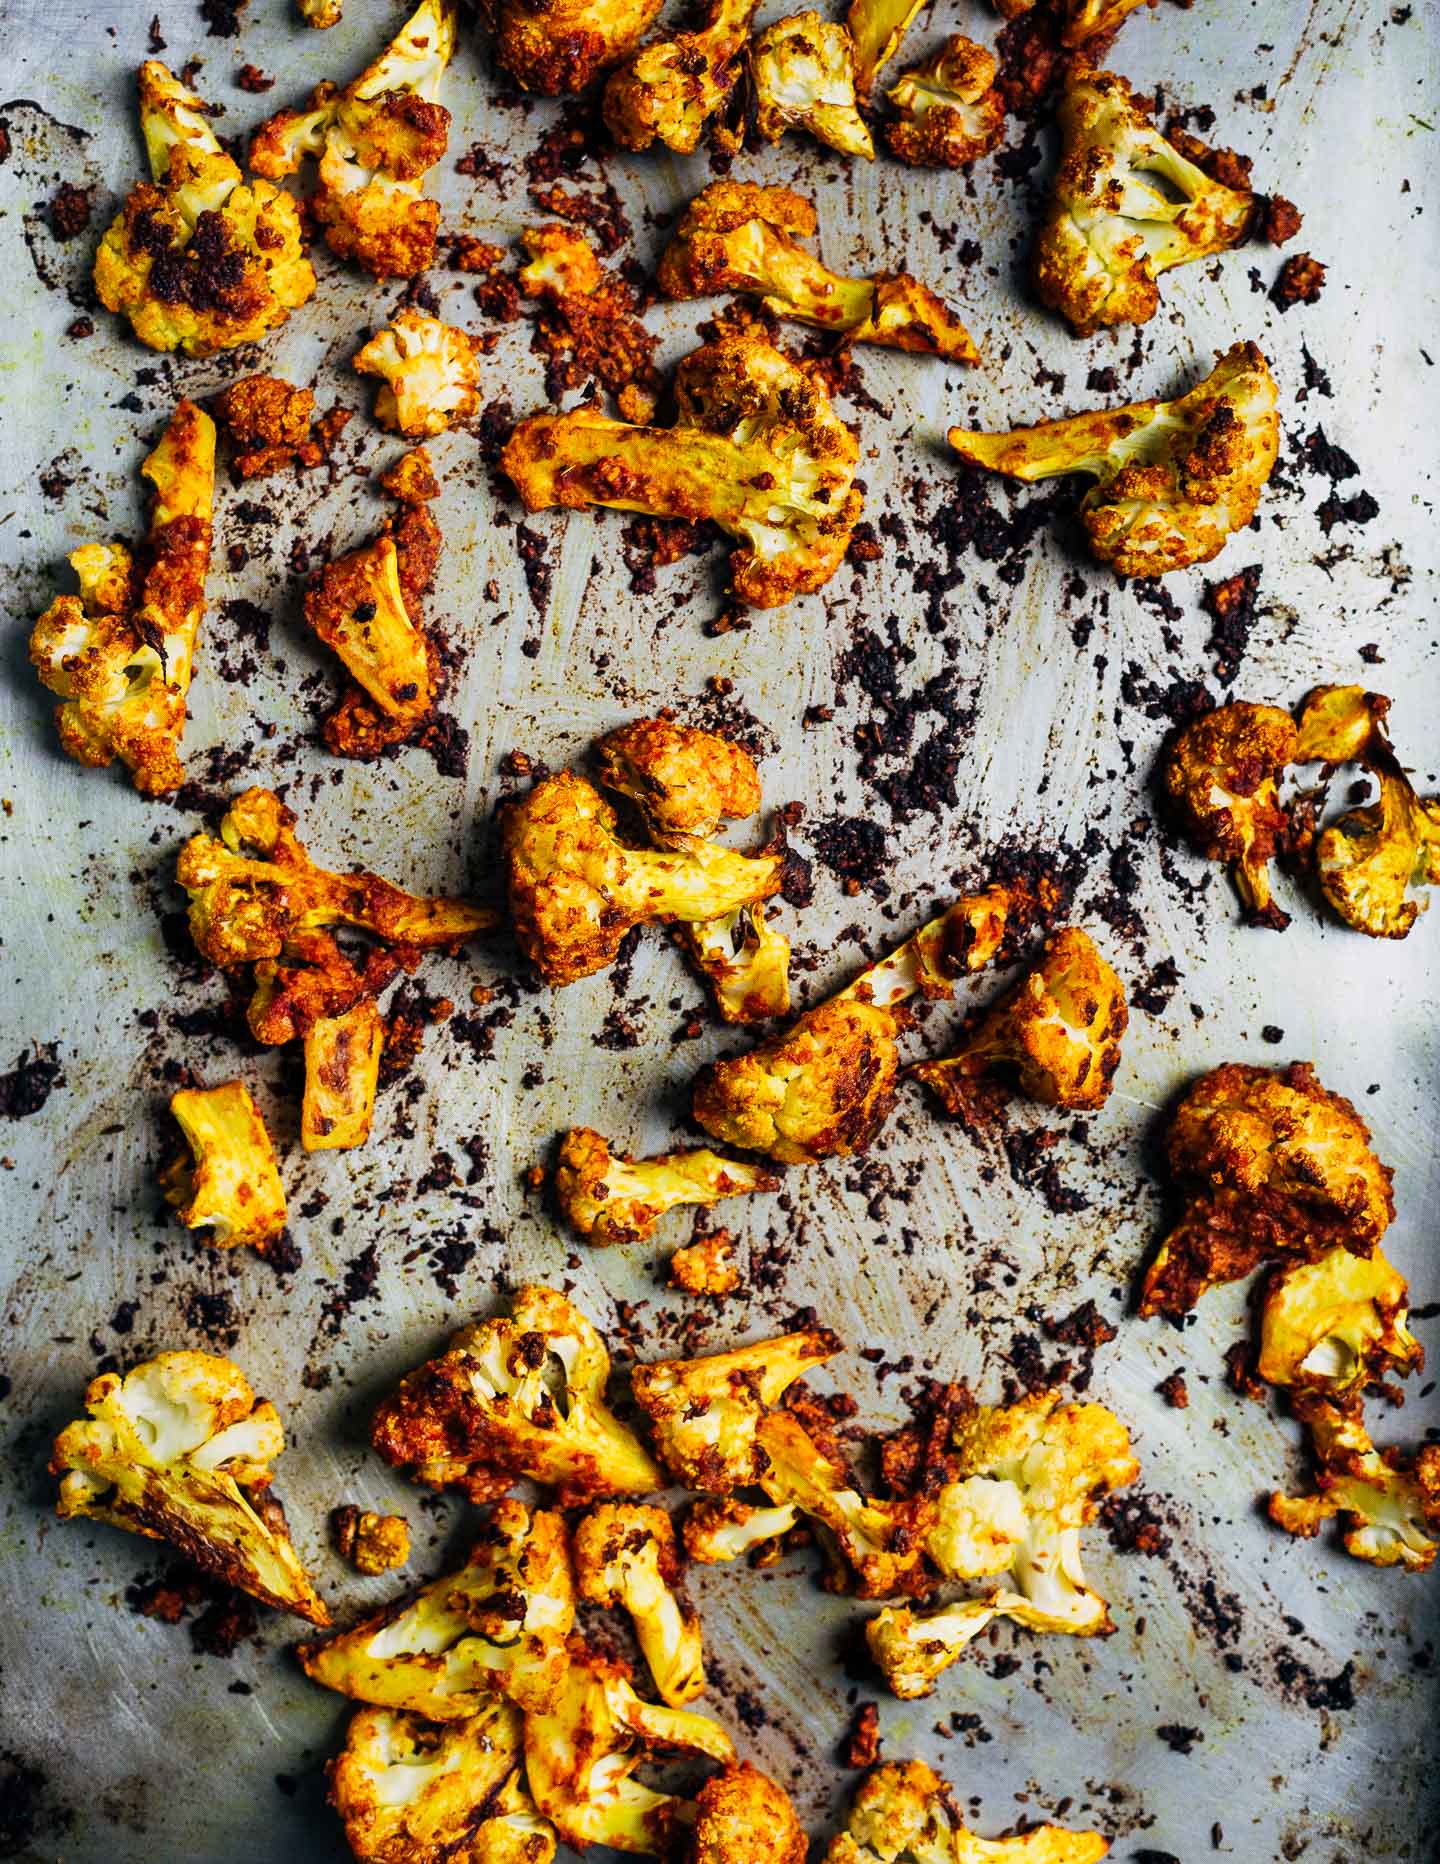 Romesco-roasted cauliflower, just out of the oven